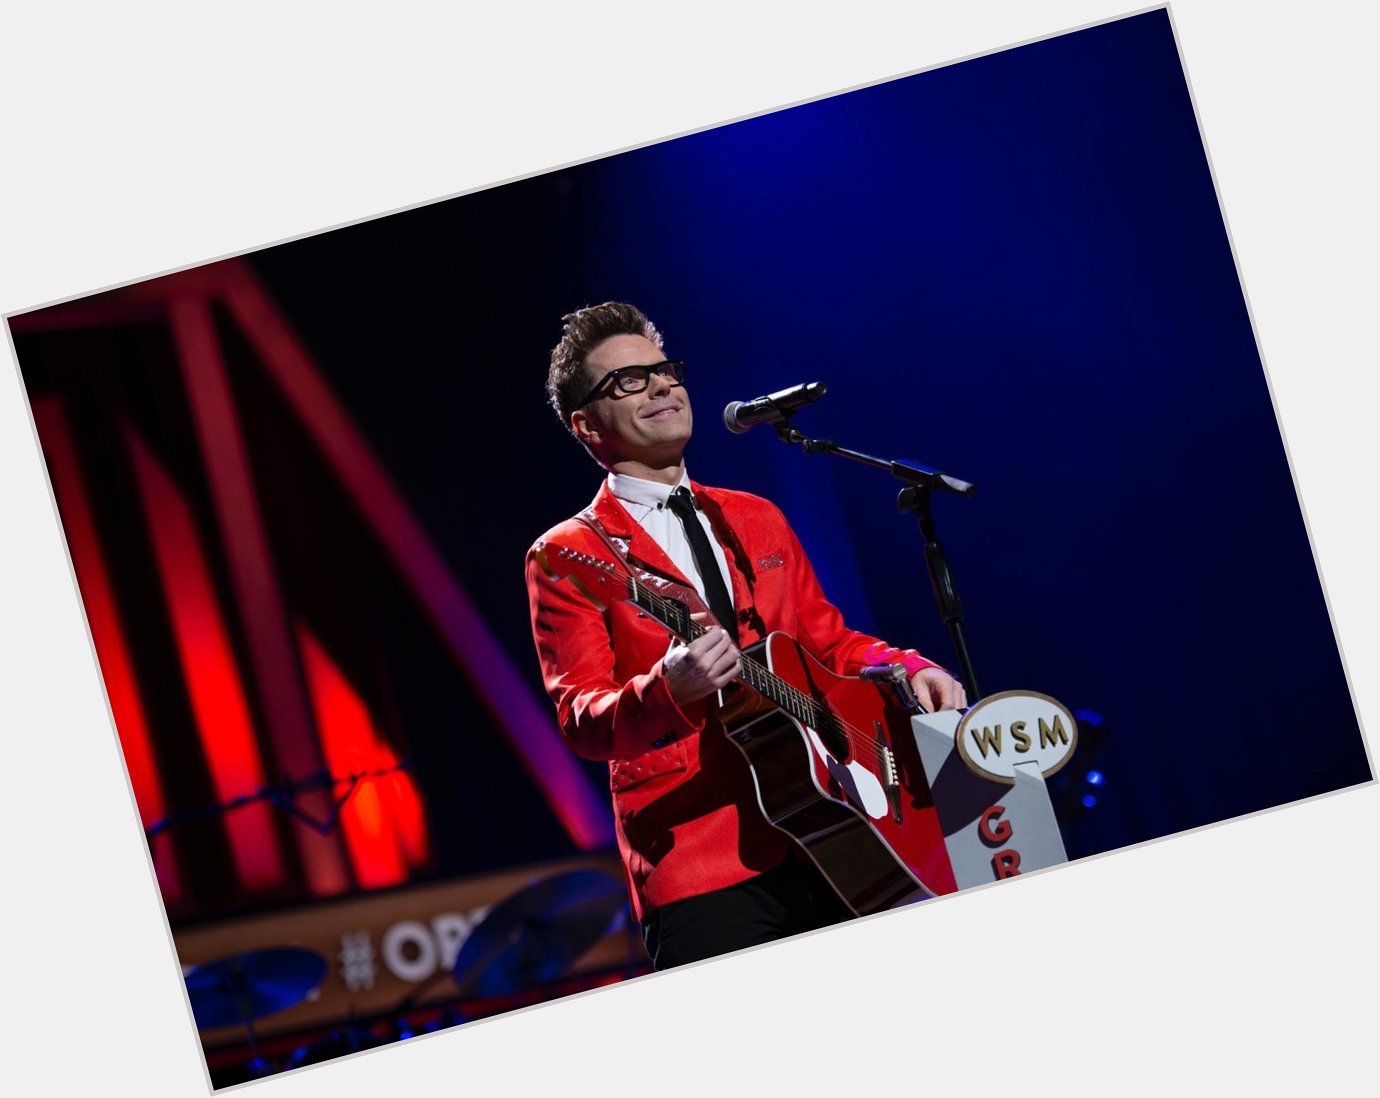 To the one and only Bobby Bones - HAPPY BIRTHDAY!! Thank you for all that you do!    